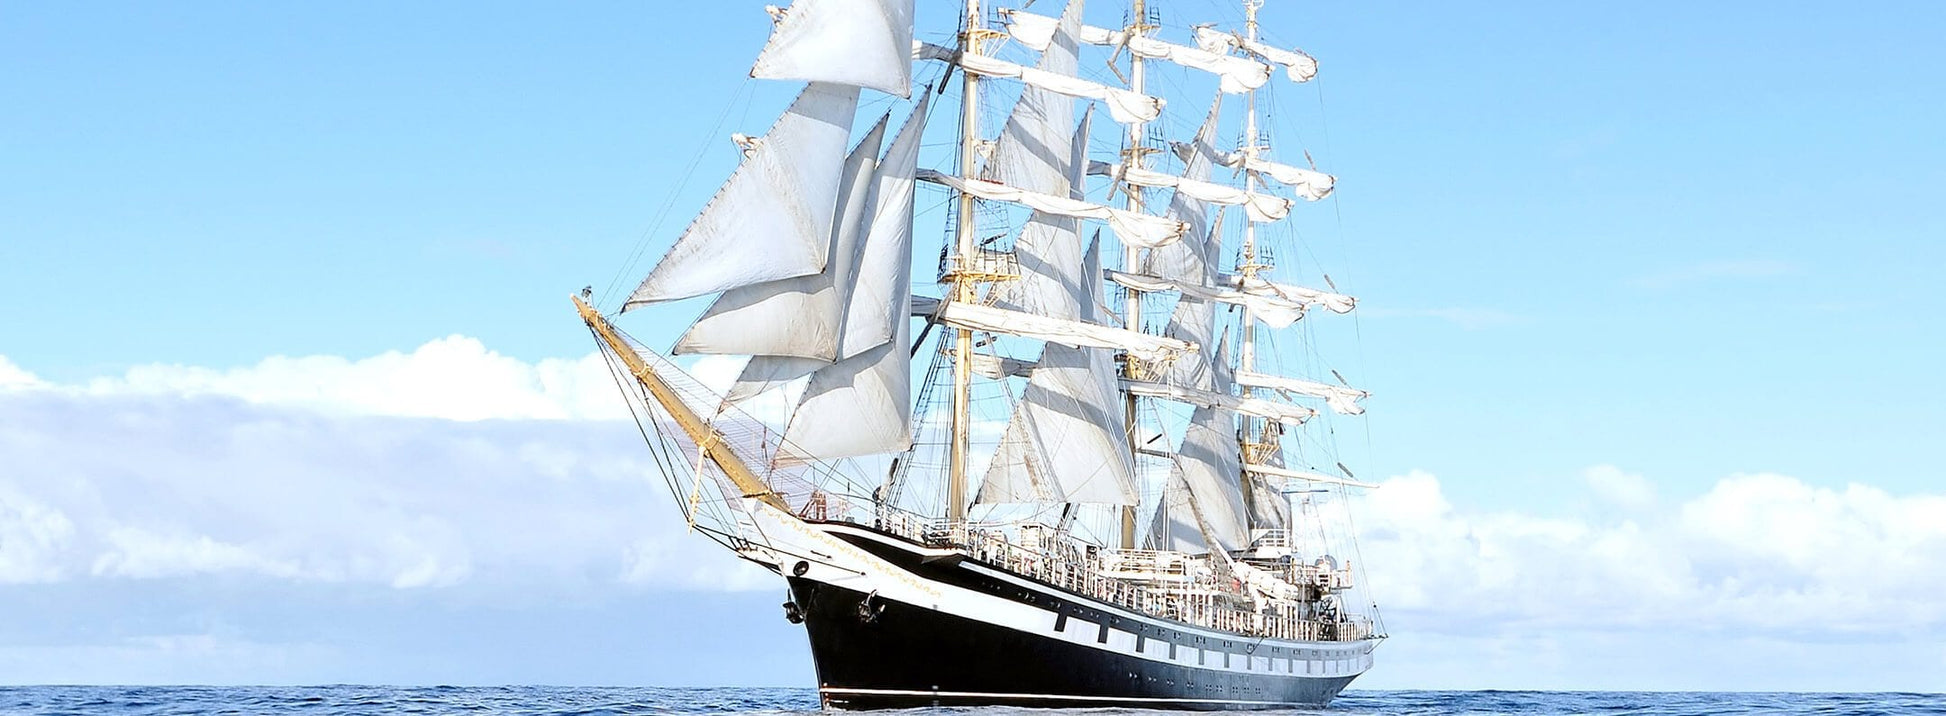 Wallpaper mural with a white ship and a blue sky for use in home decoration